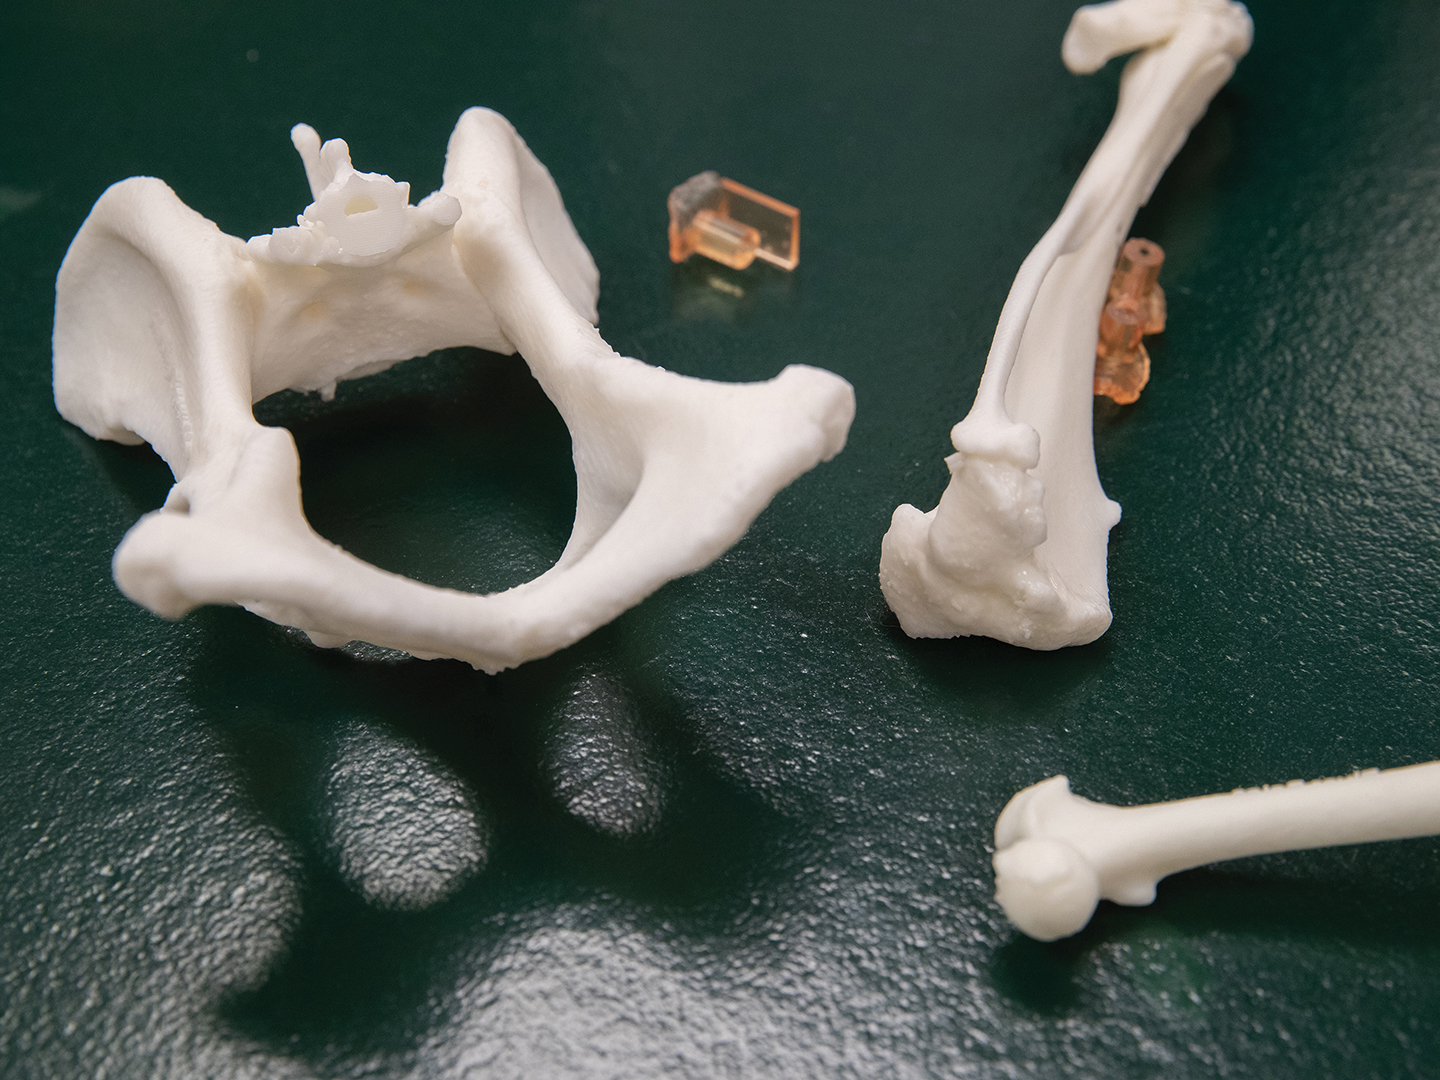 3D Printing, Motion-Tracking Technology Create New Treatment Options For Veterinary Orthopedic Patients